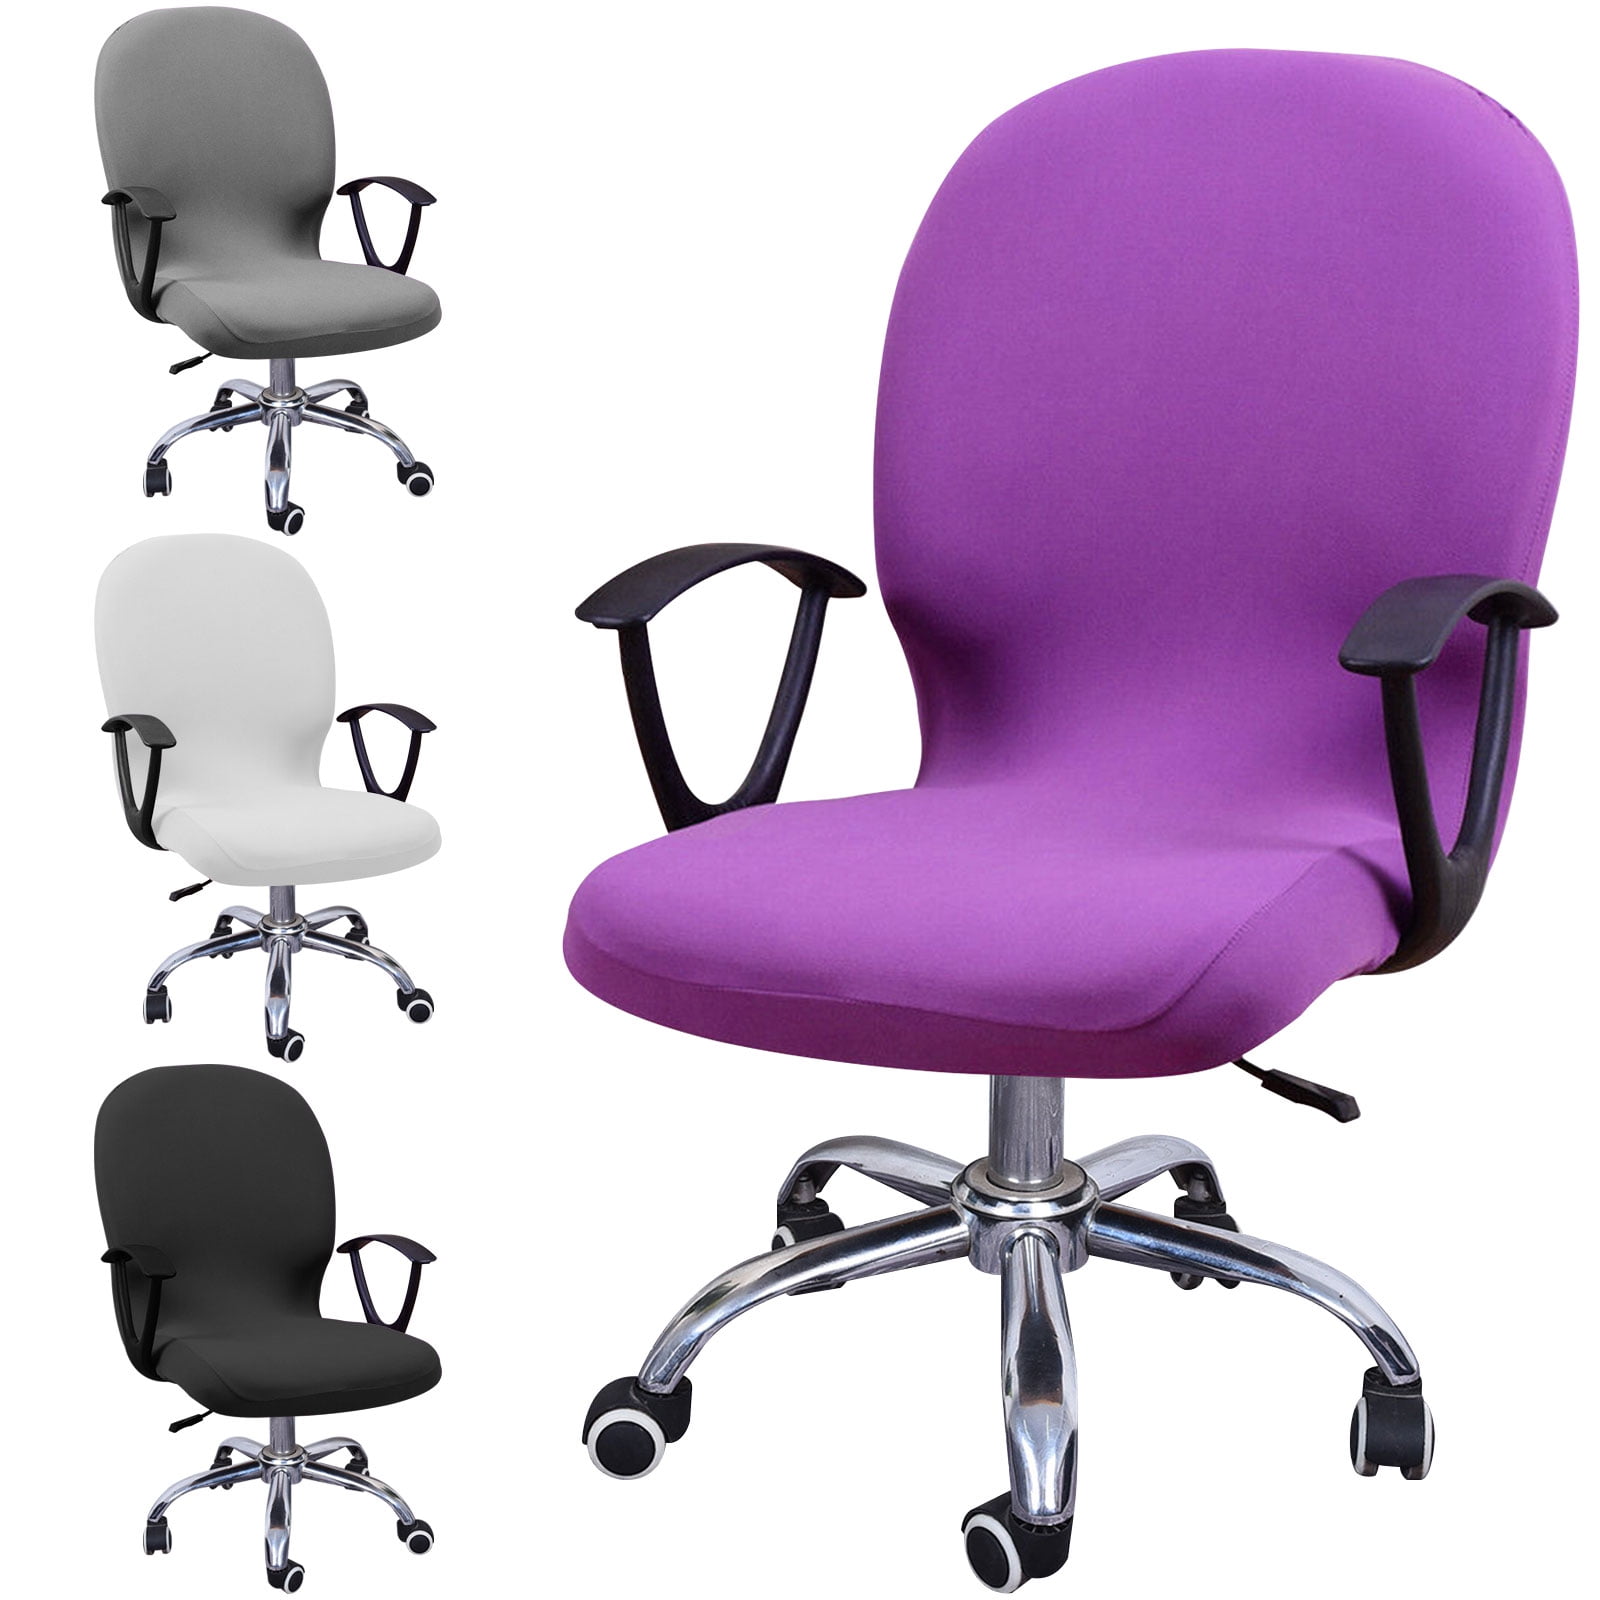 Stretchy Office Chair Cover Protector , TSV Computer Office Chair